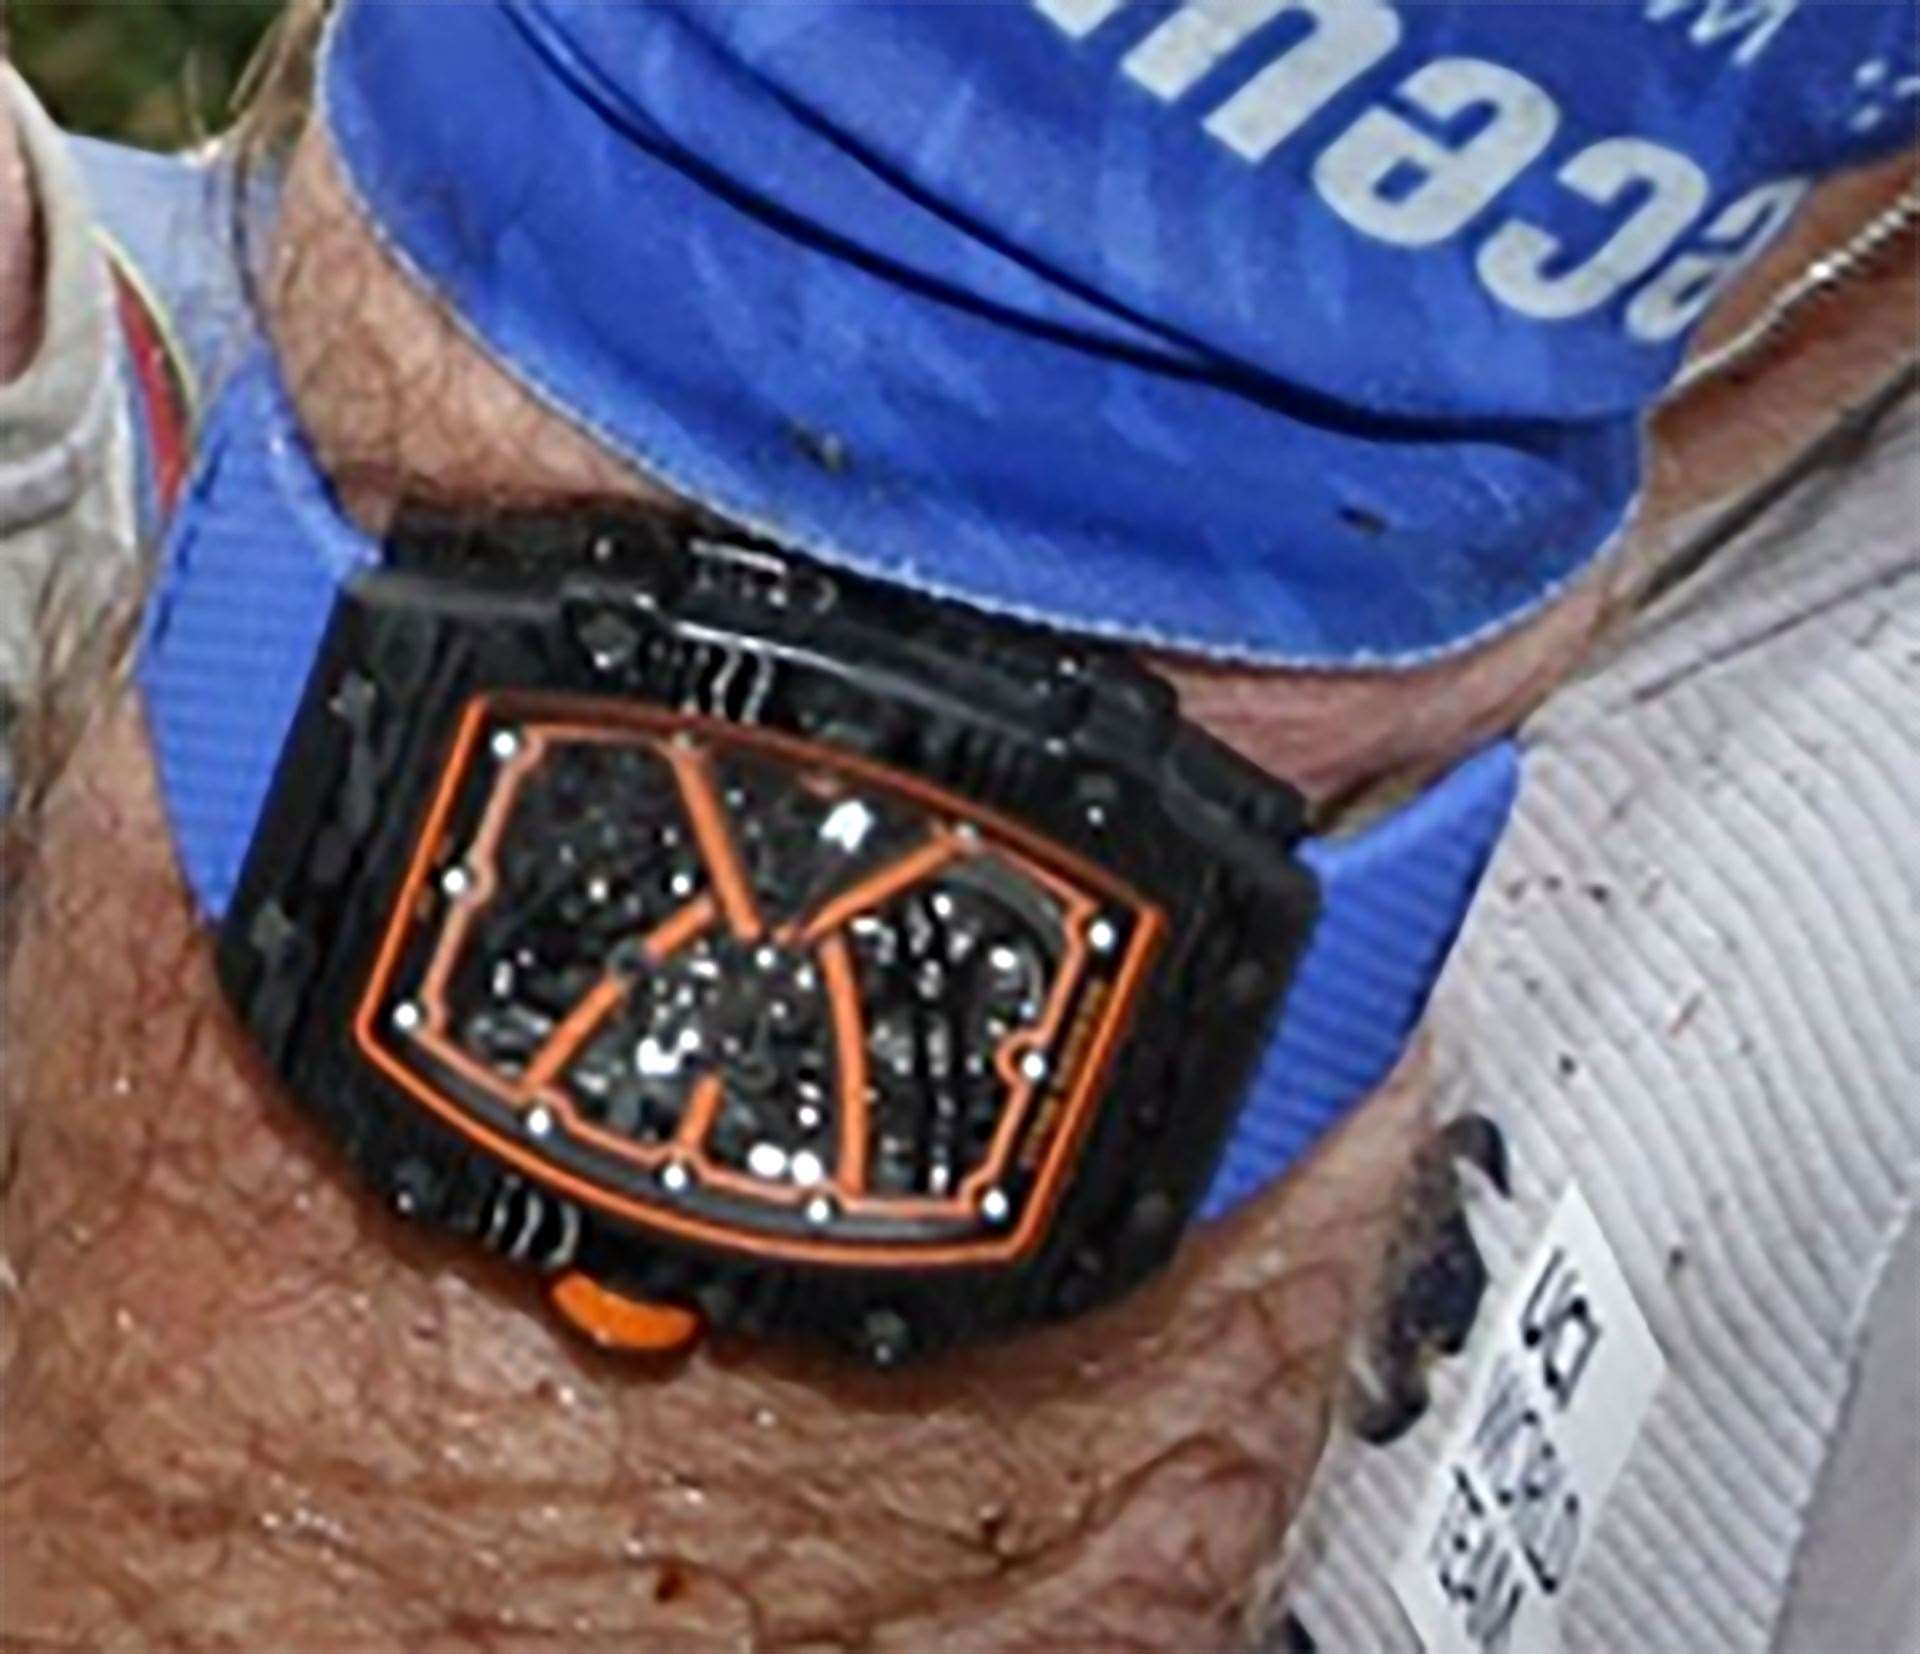 One of the watches stolen by armed intruders (Essex Police)